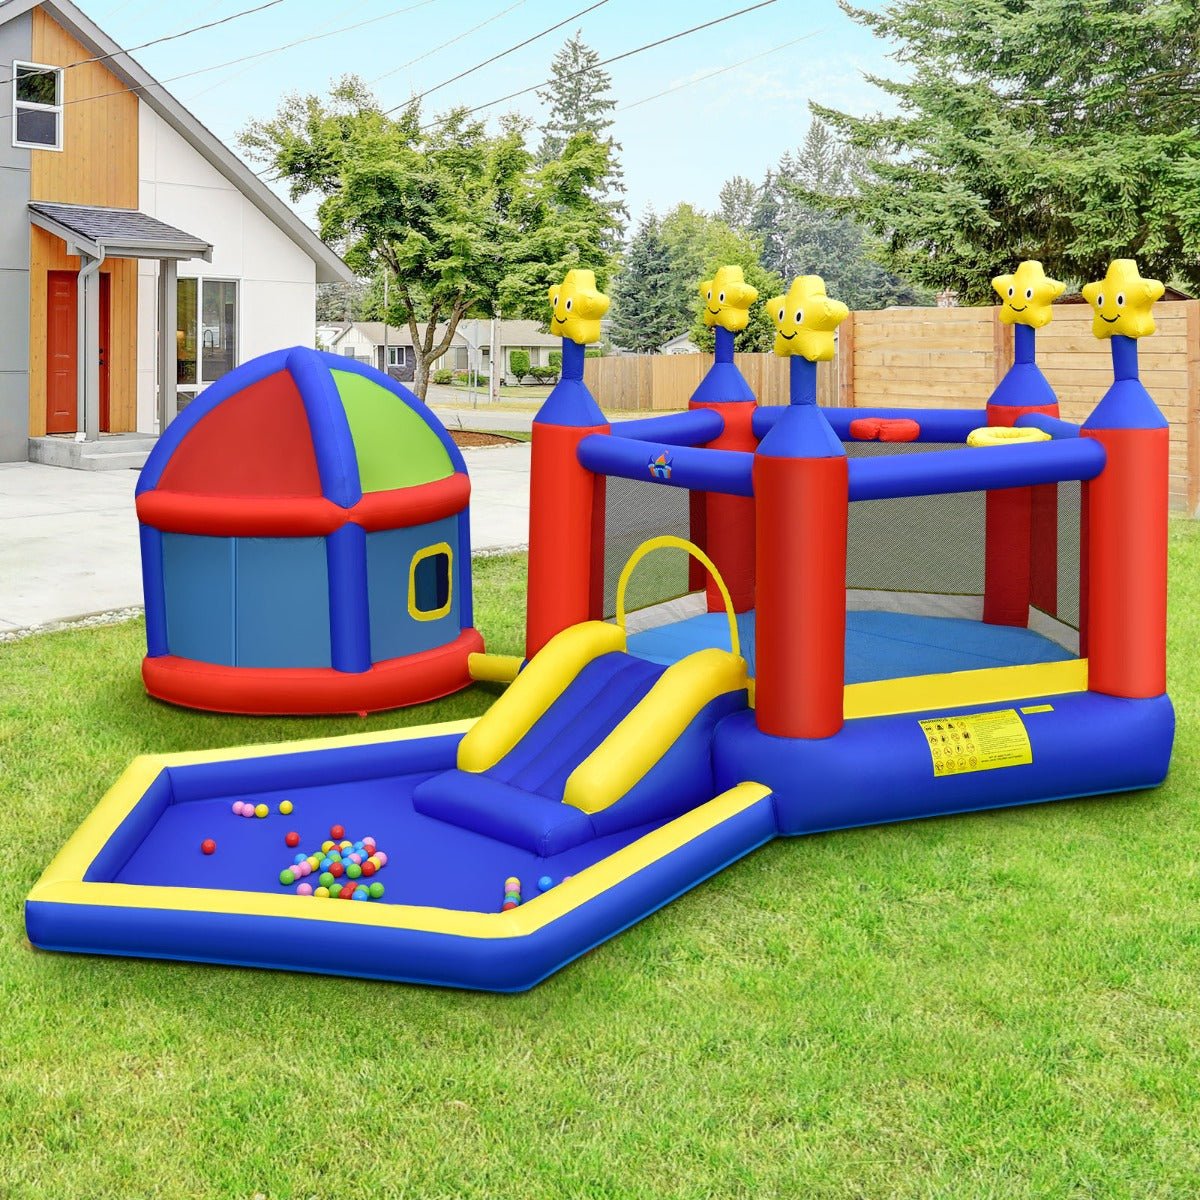 Children's Inflatable Bouncy House - Double Basketball Fun for Kids